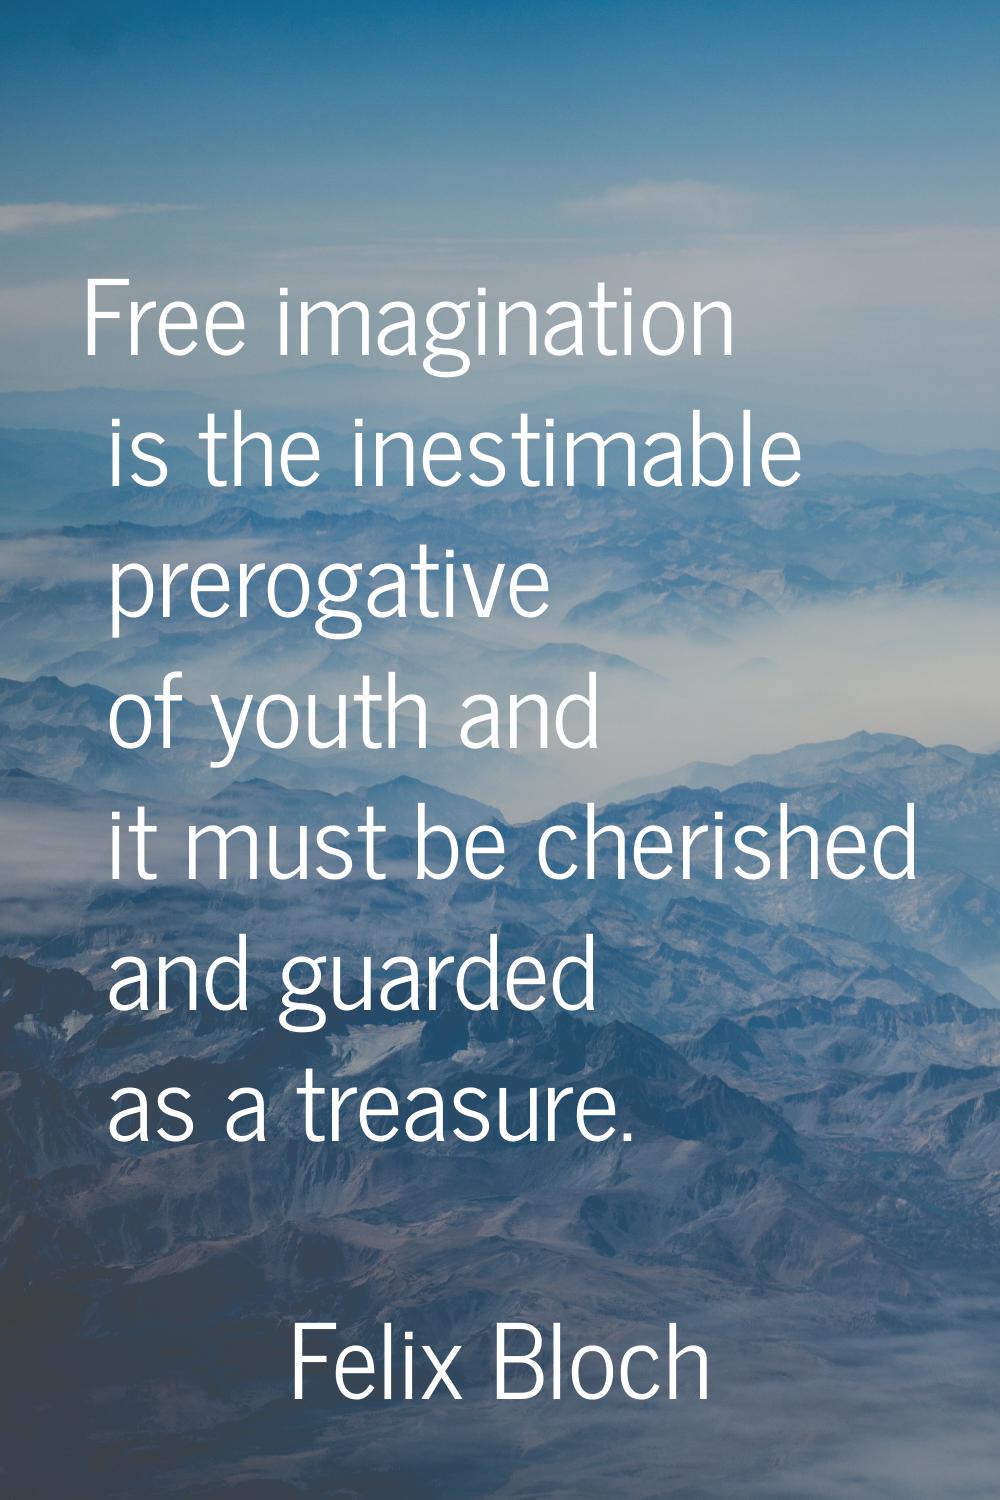 Free imagination is the inestimable prerogative of youth and it must be cherished and guarded as a 